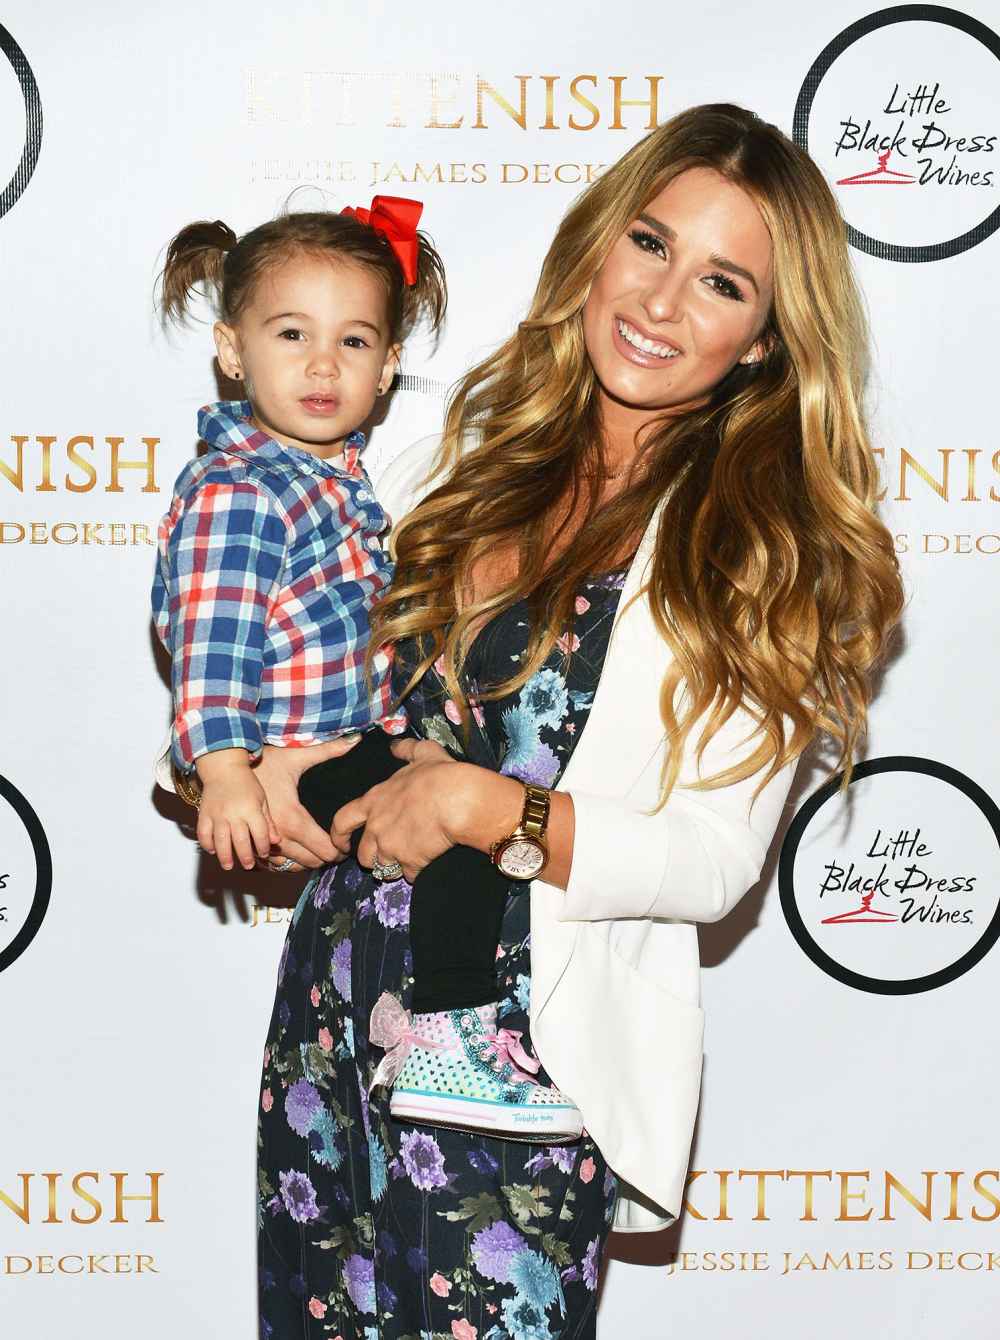 Jessie James Decker’s 4-Year-Old Daughter Vivianne Loves to Perform: ‘I Was the Same Way as a Little Girl’ Jessie James Decker and daughter, Vivianne Rose Decker